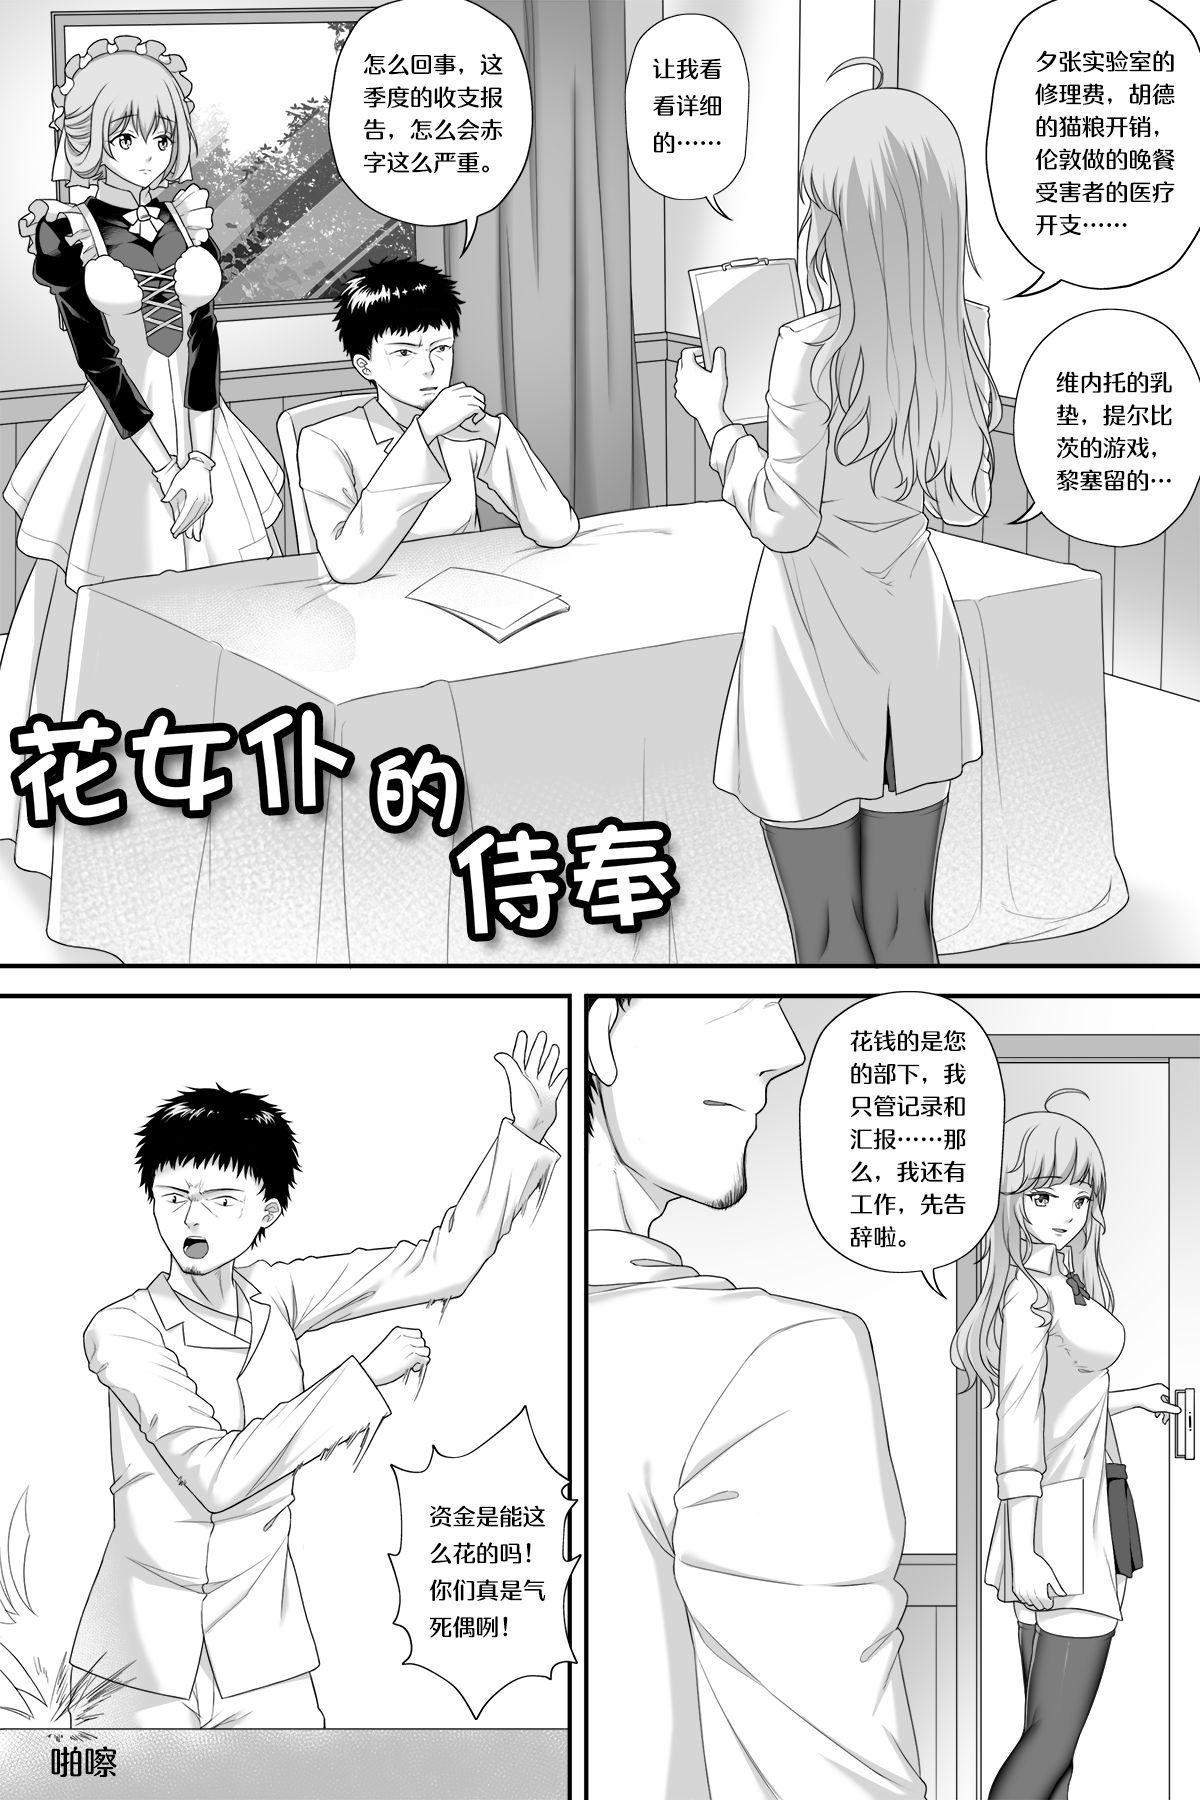 Rimming 花女仆的侍奉 - Warship girls Story - Picture 1